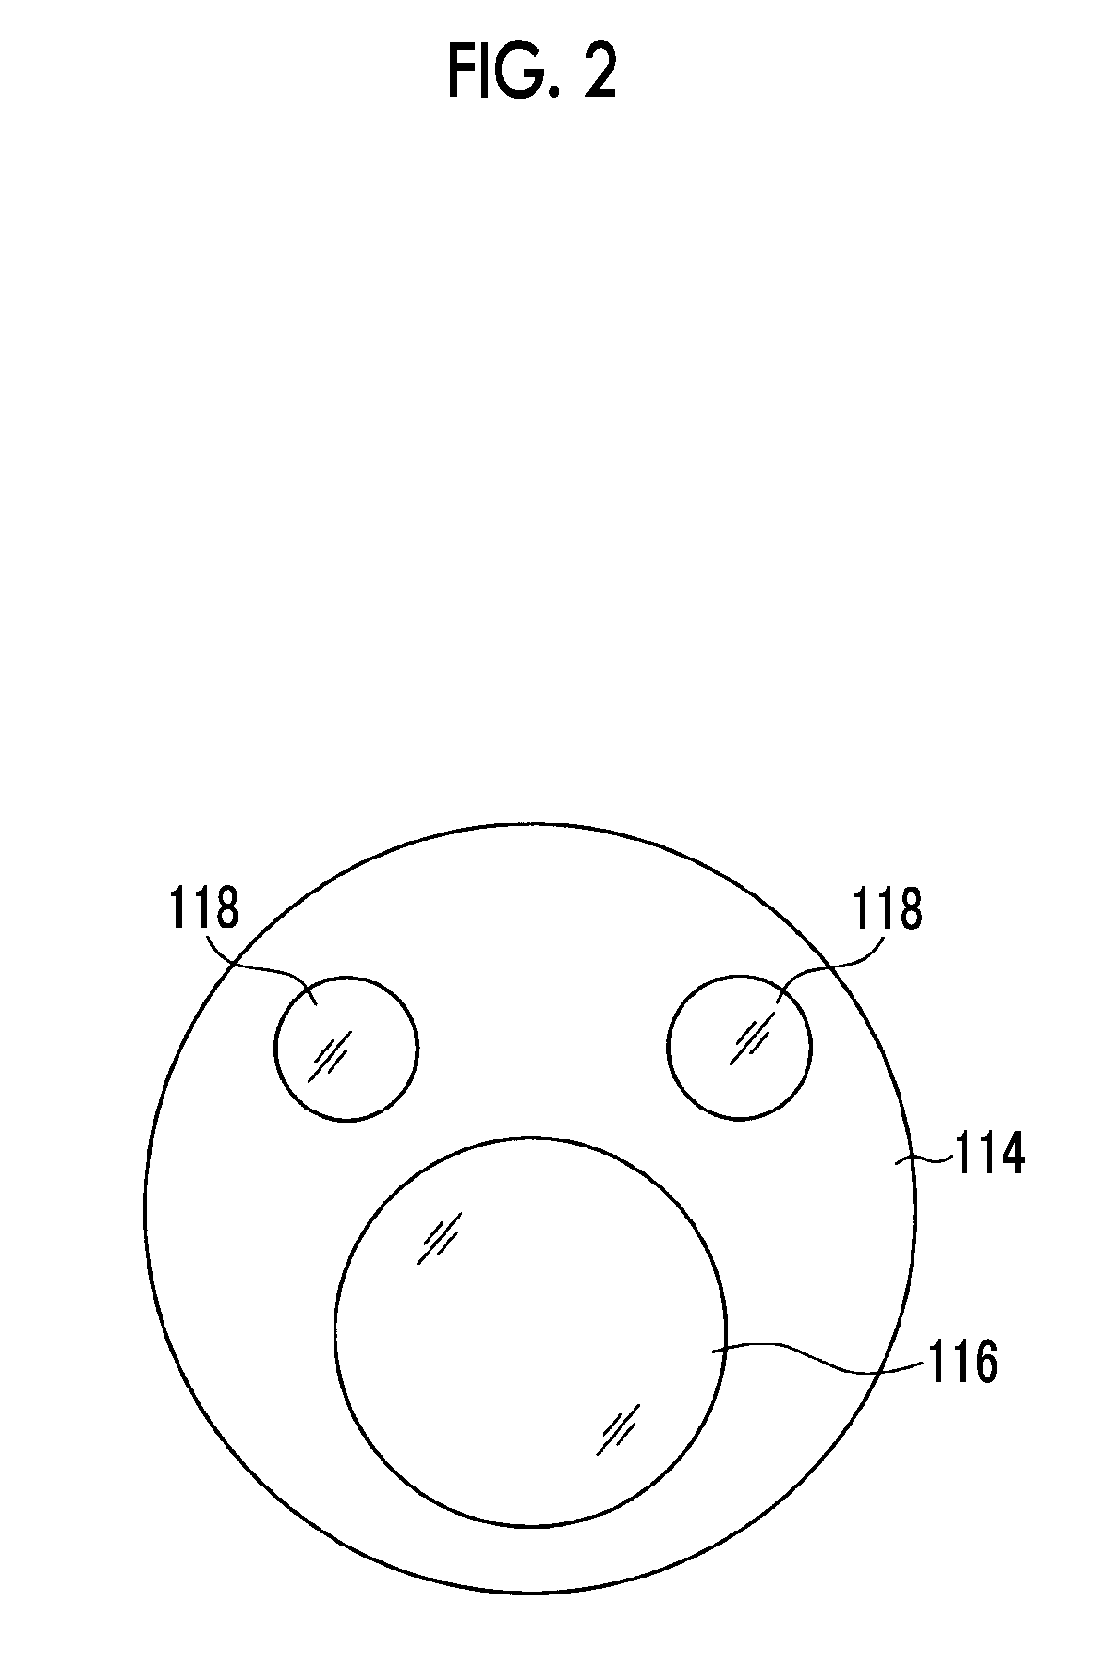 Endoscopic surgical device and outer sleeve